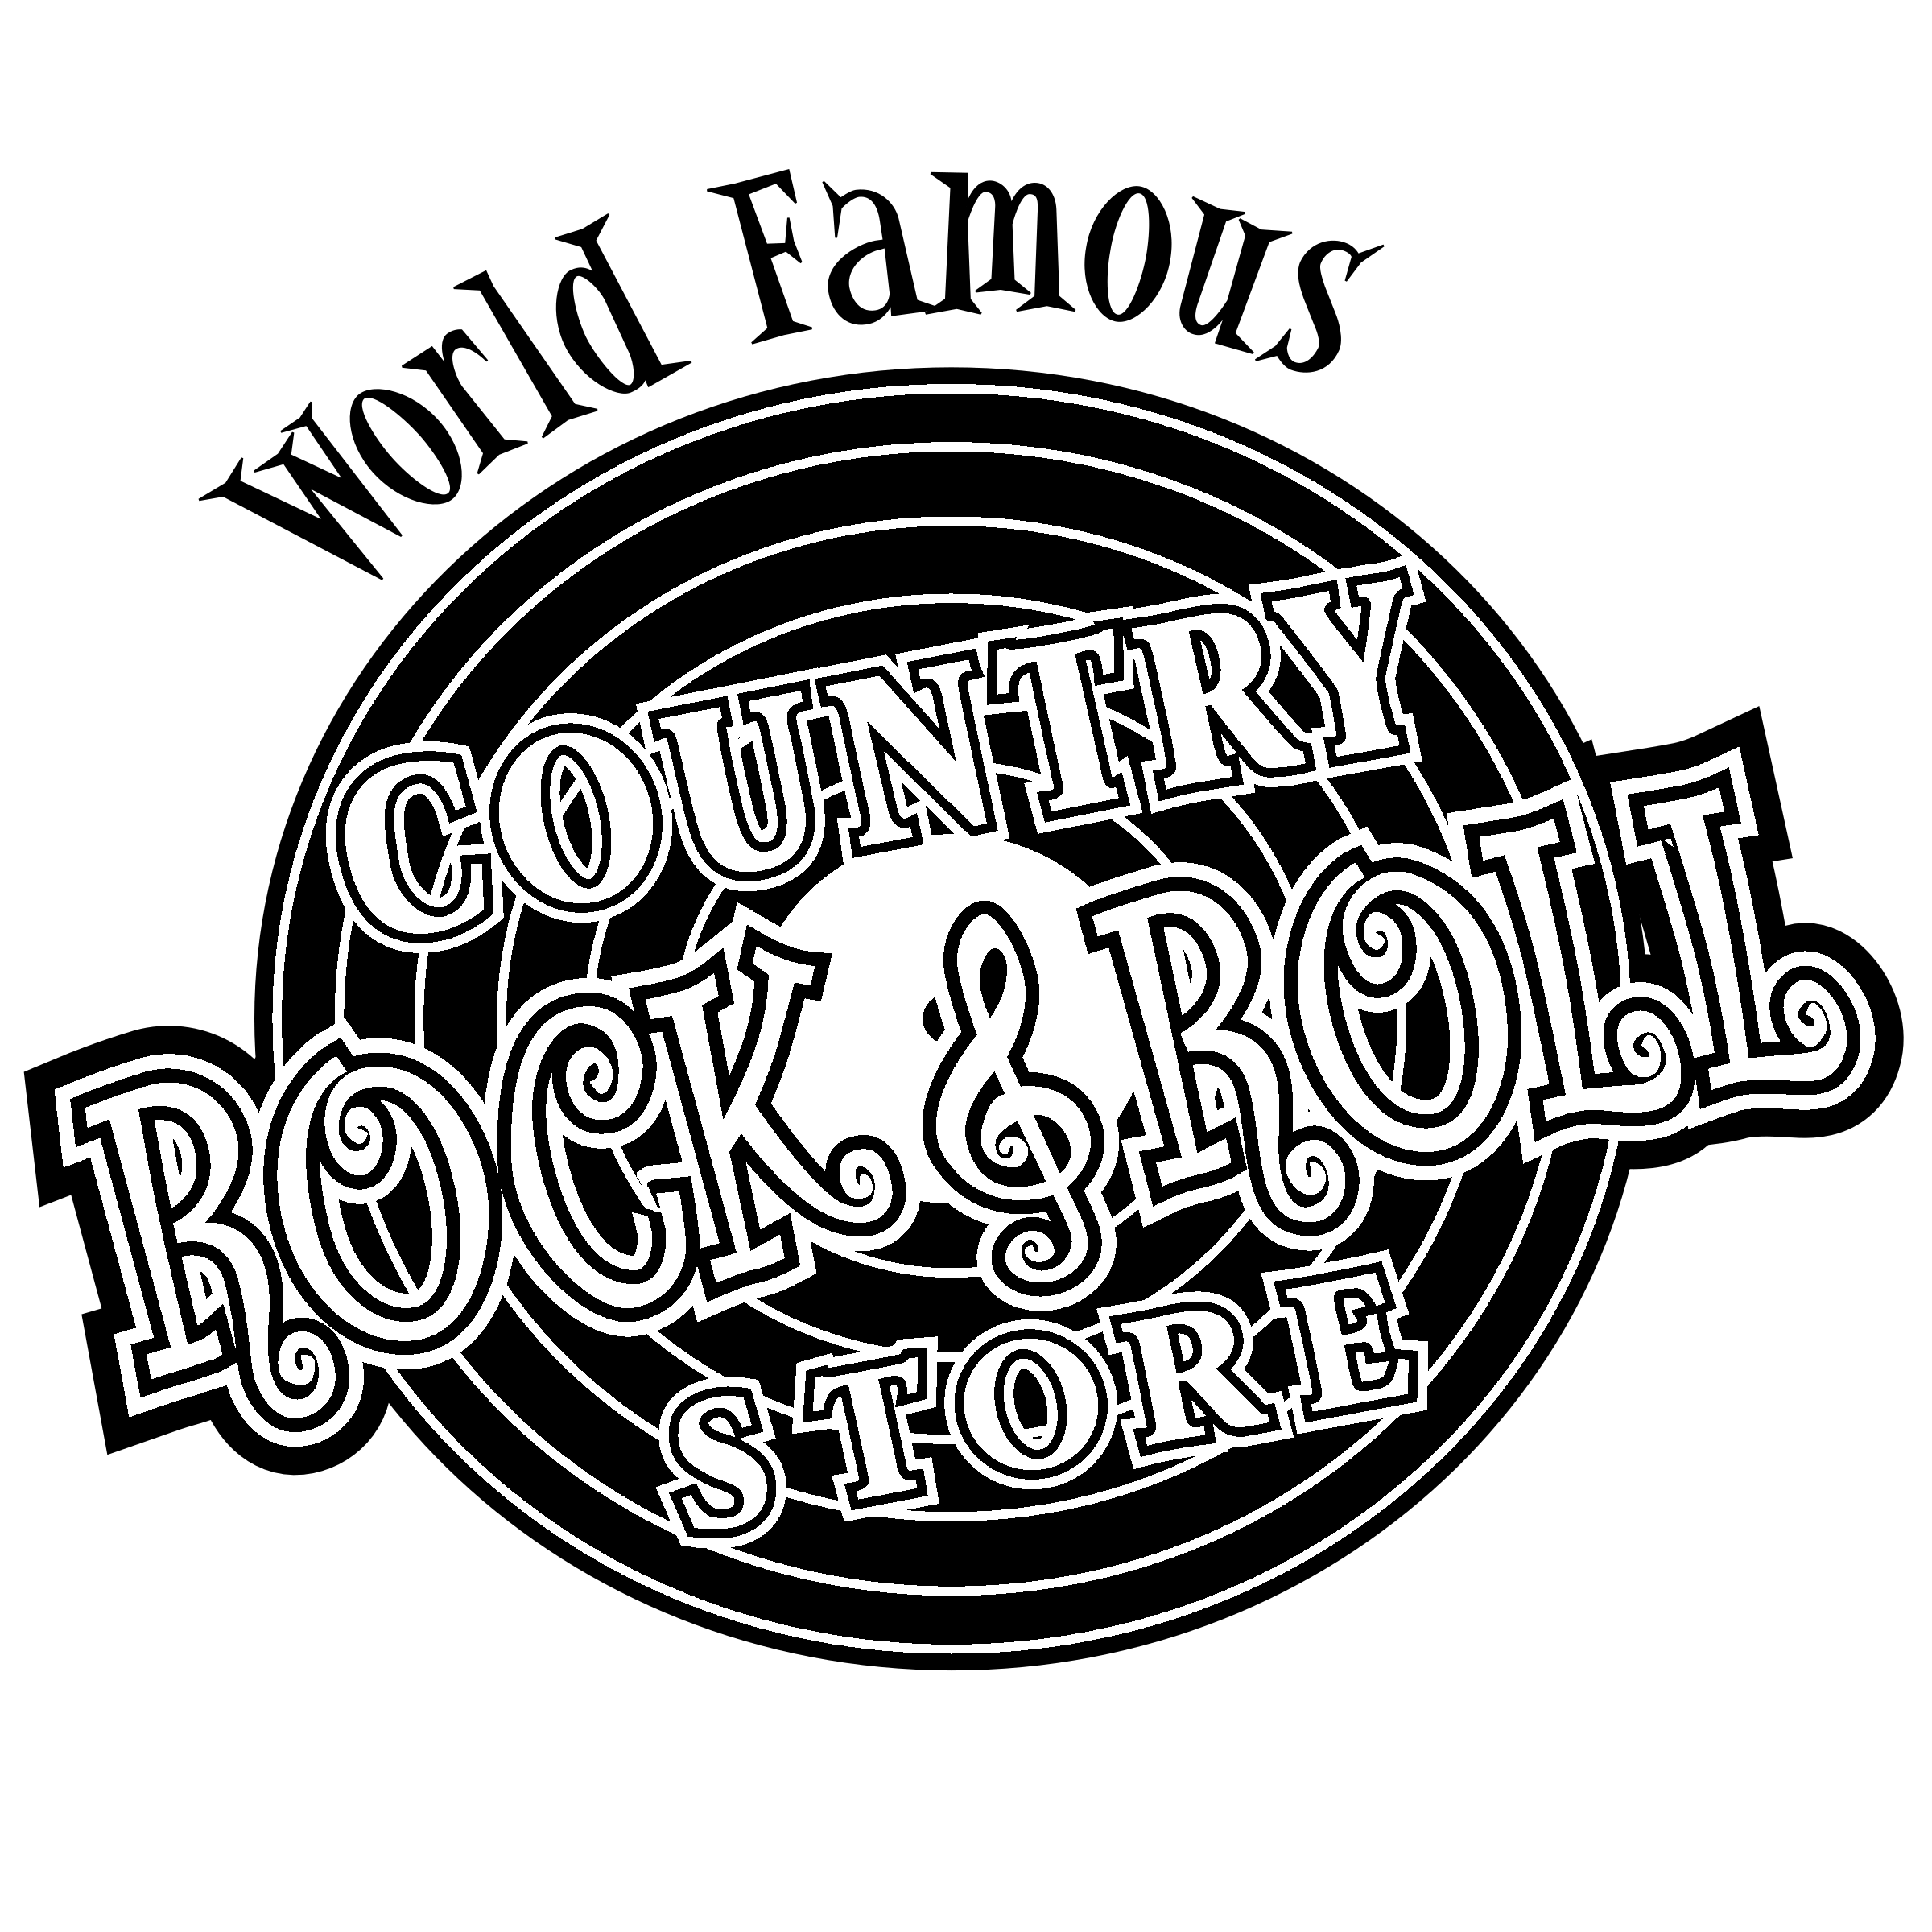 Famous Black and White Store Logo - Country Rock n Roll Store Logo PNG Transparent & SVG Vector